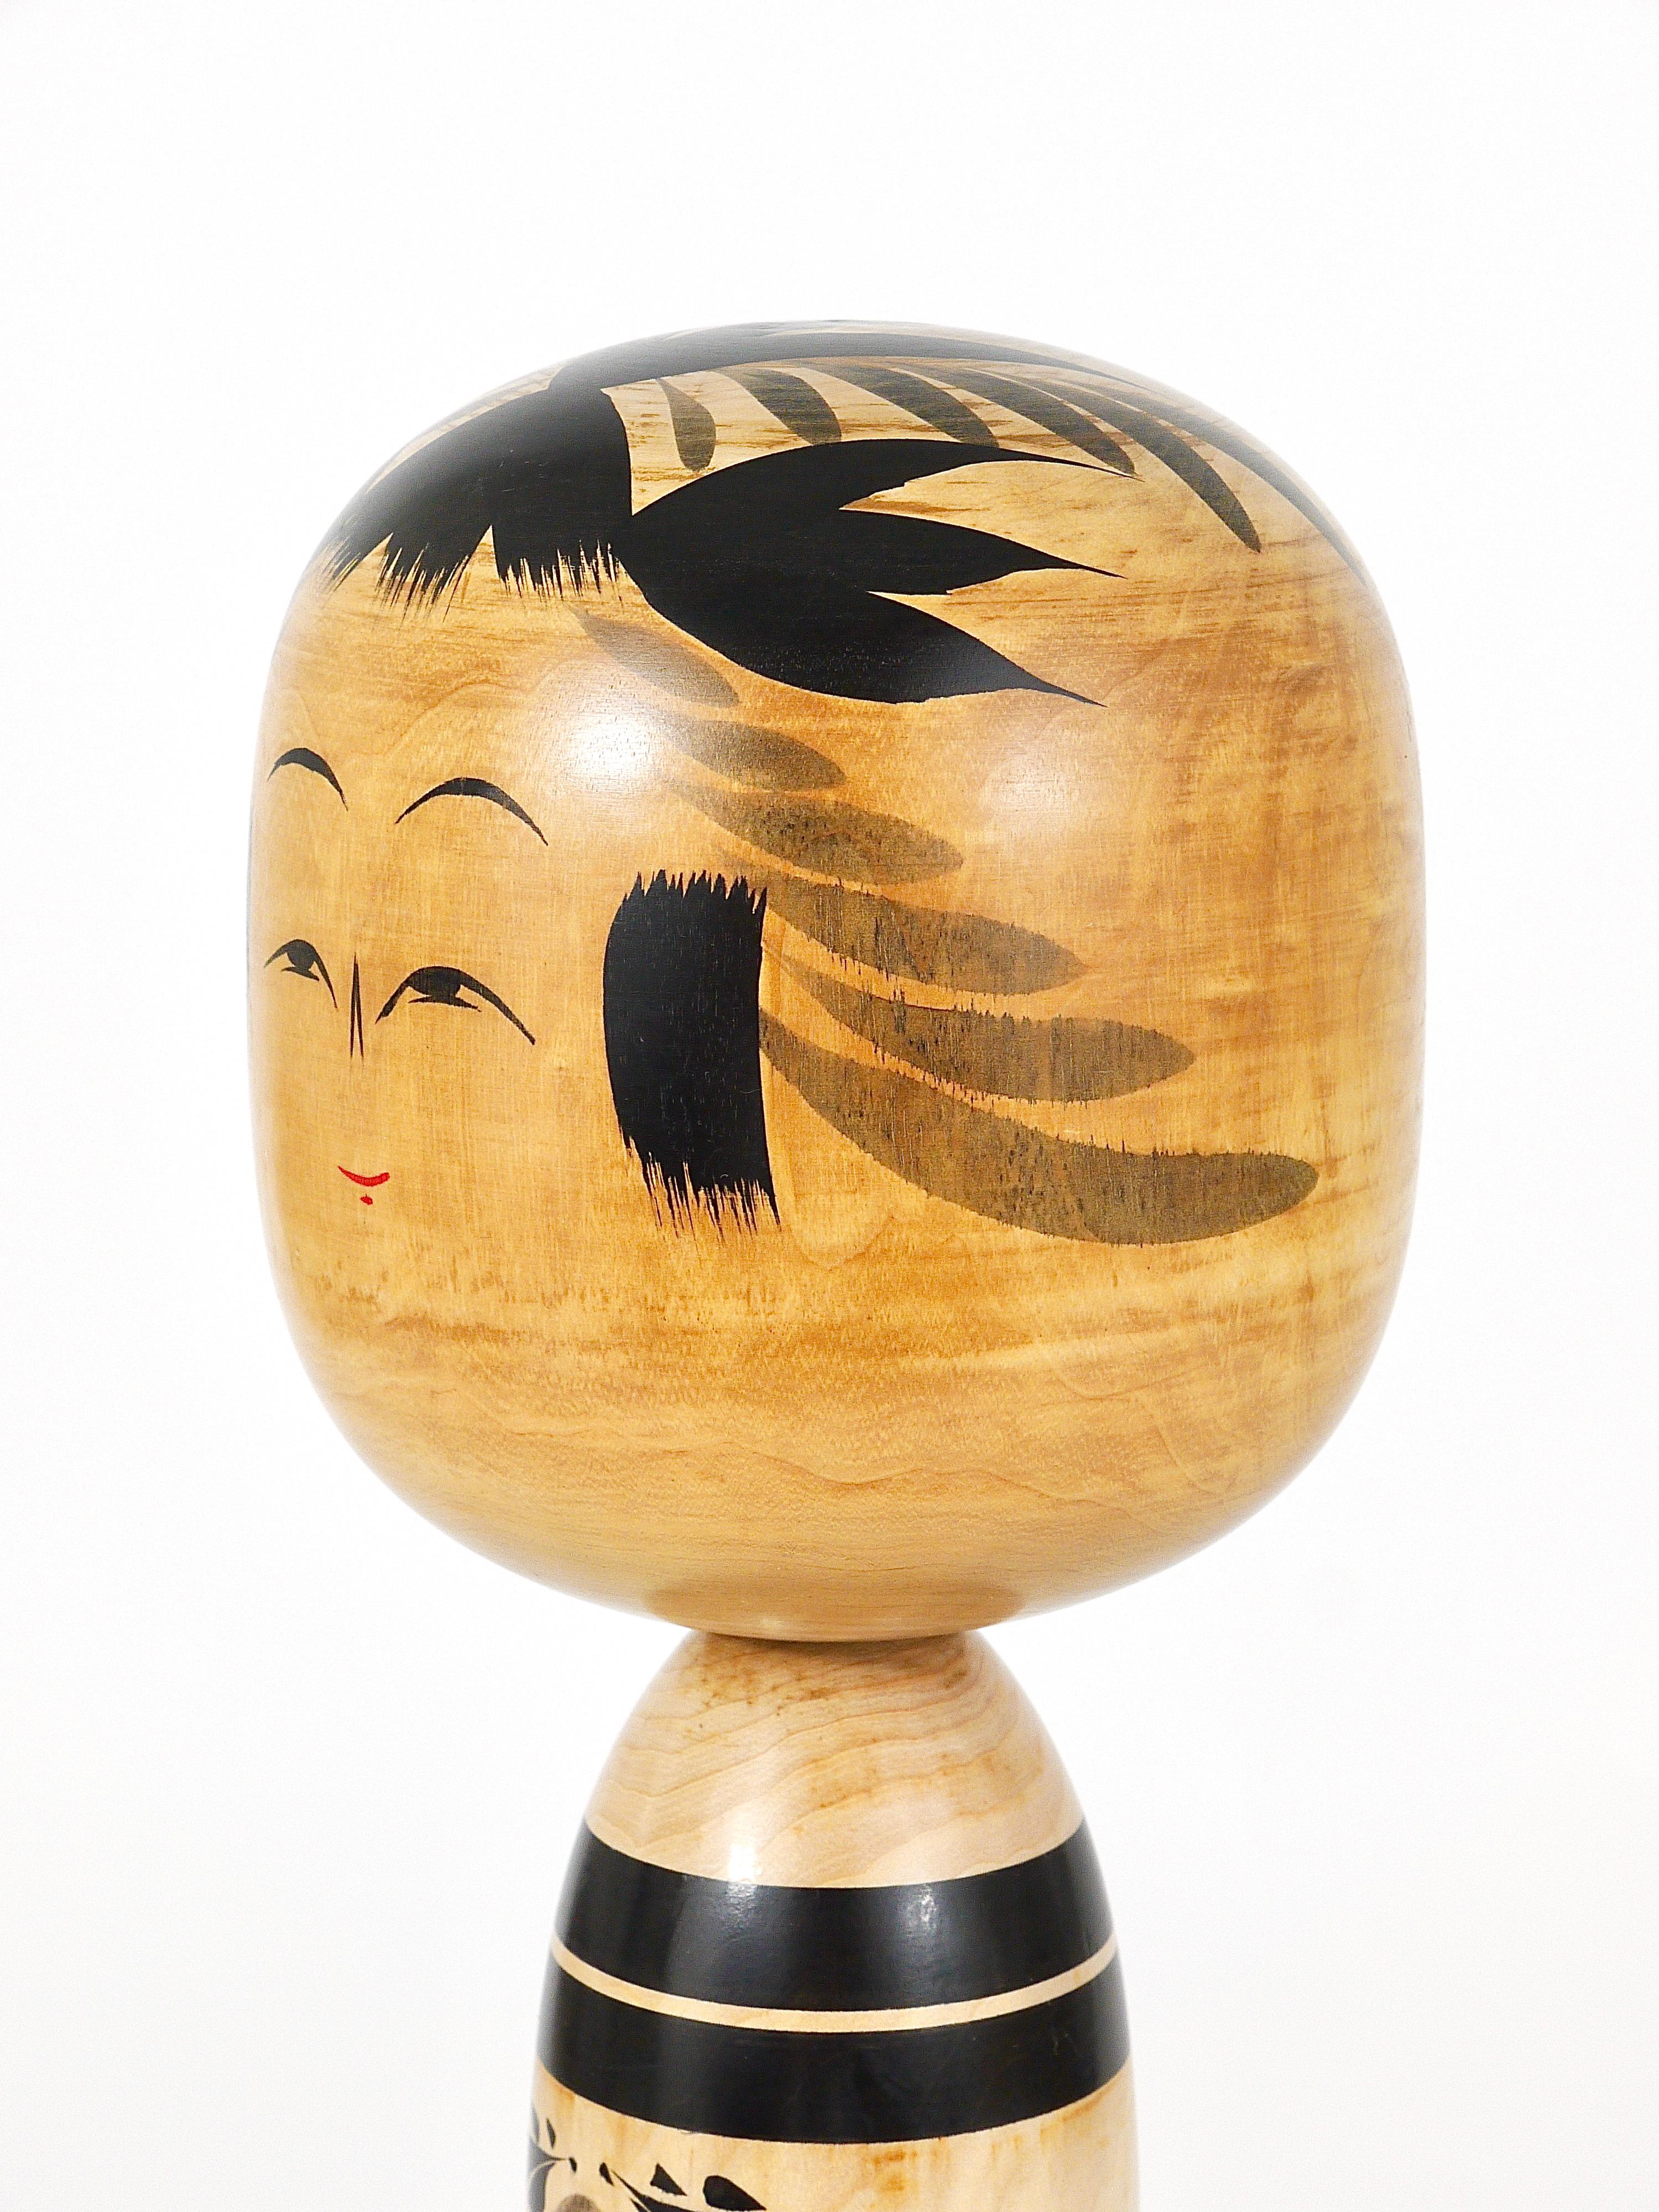 Wood Decorative Togatta Kokeshi Doll Sculpture from Northern Japan, Hand-Painted For Sale